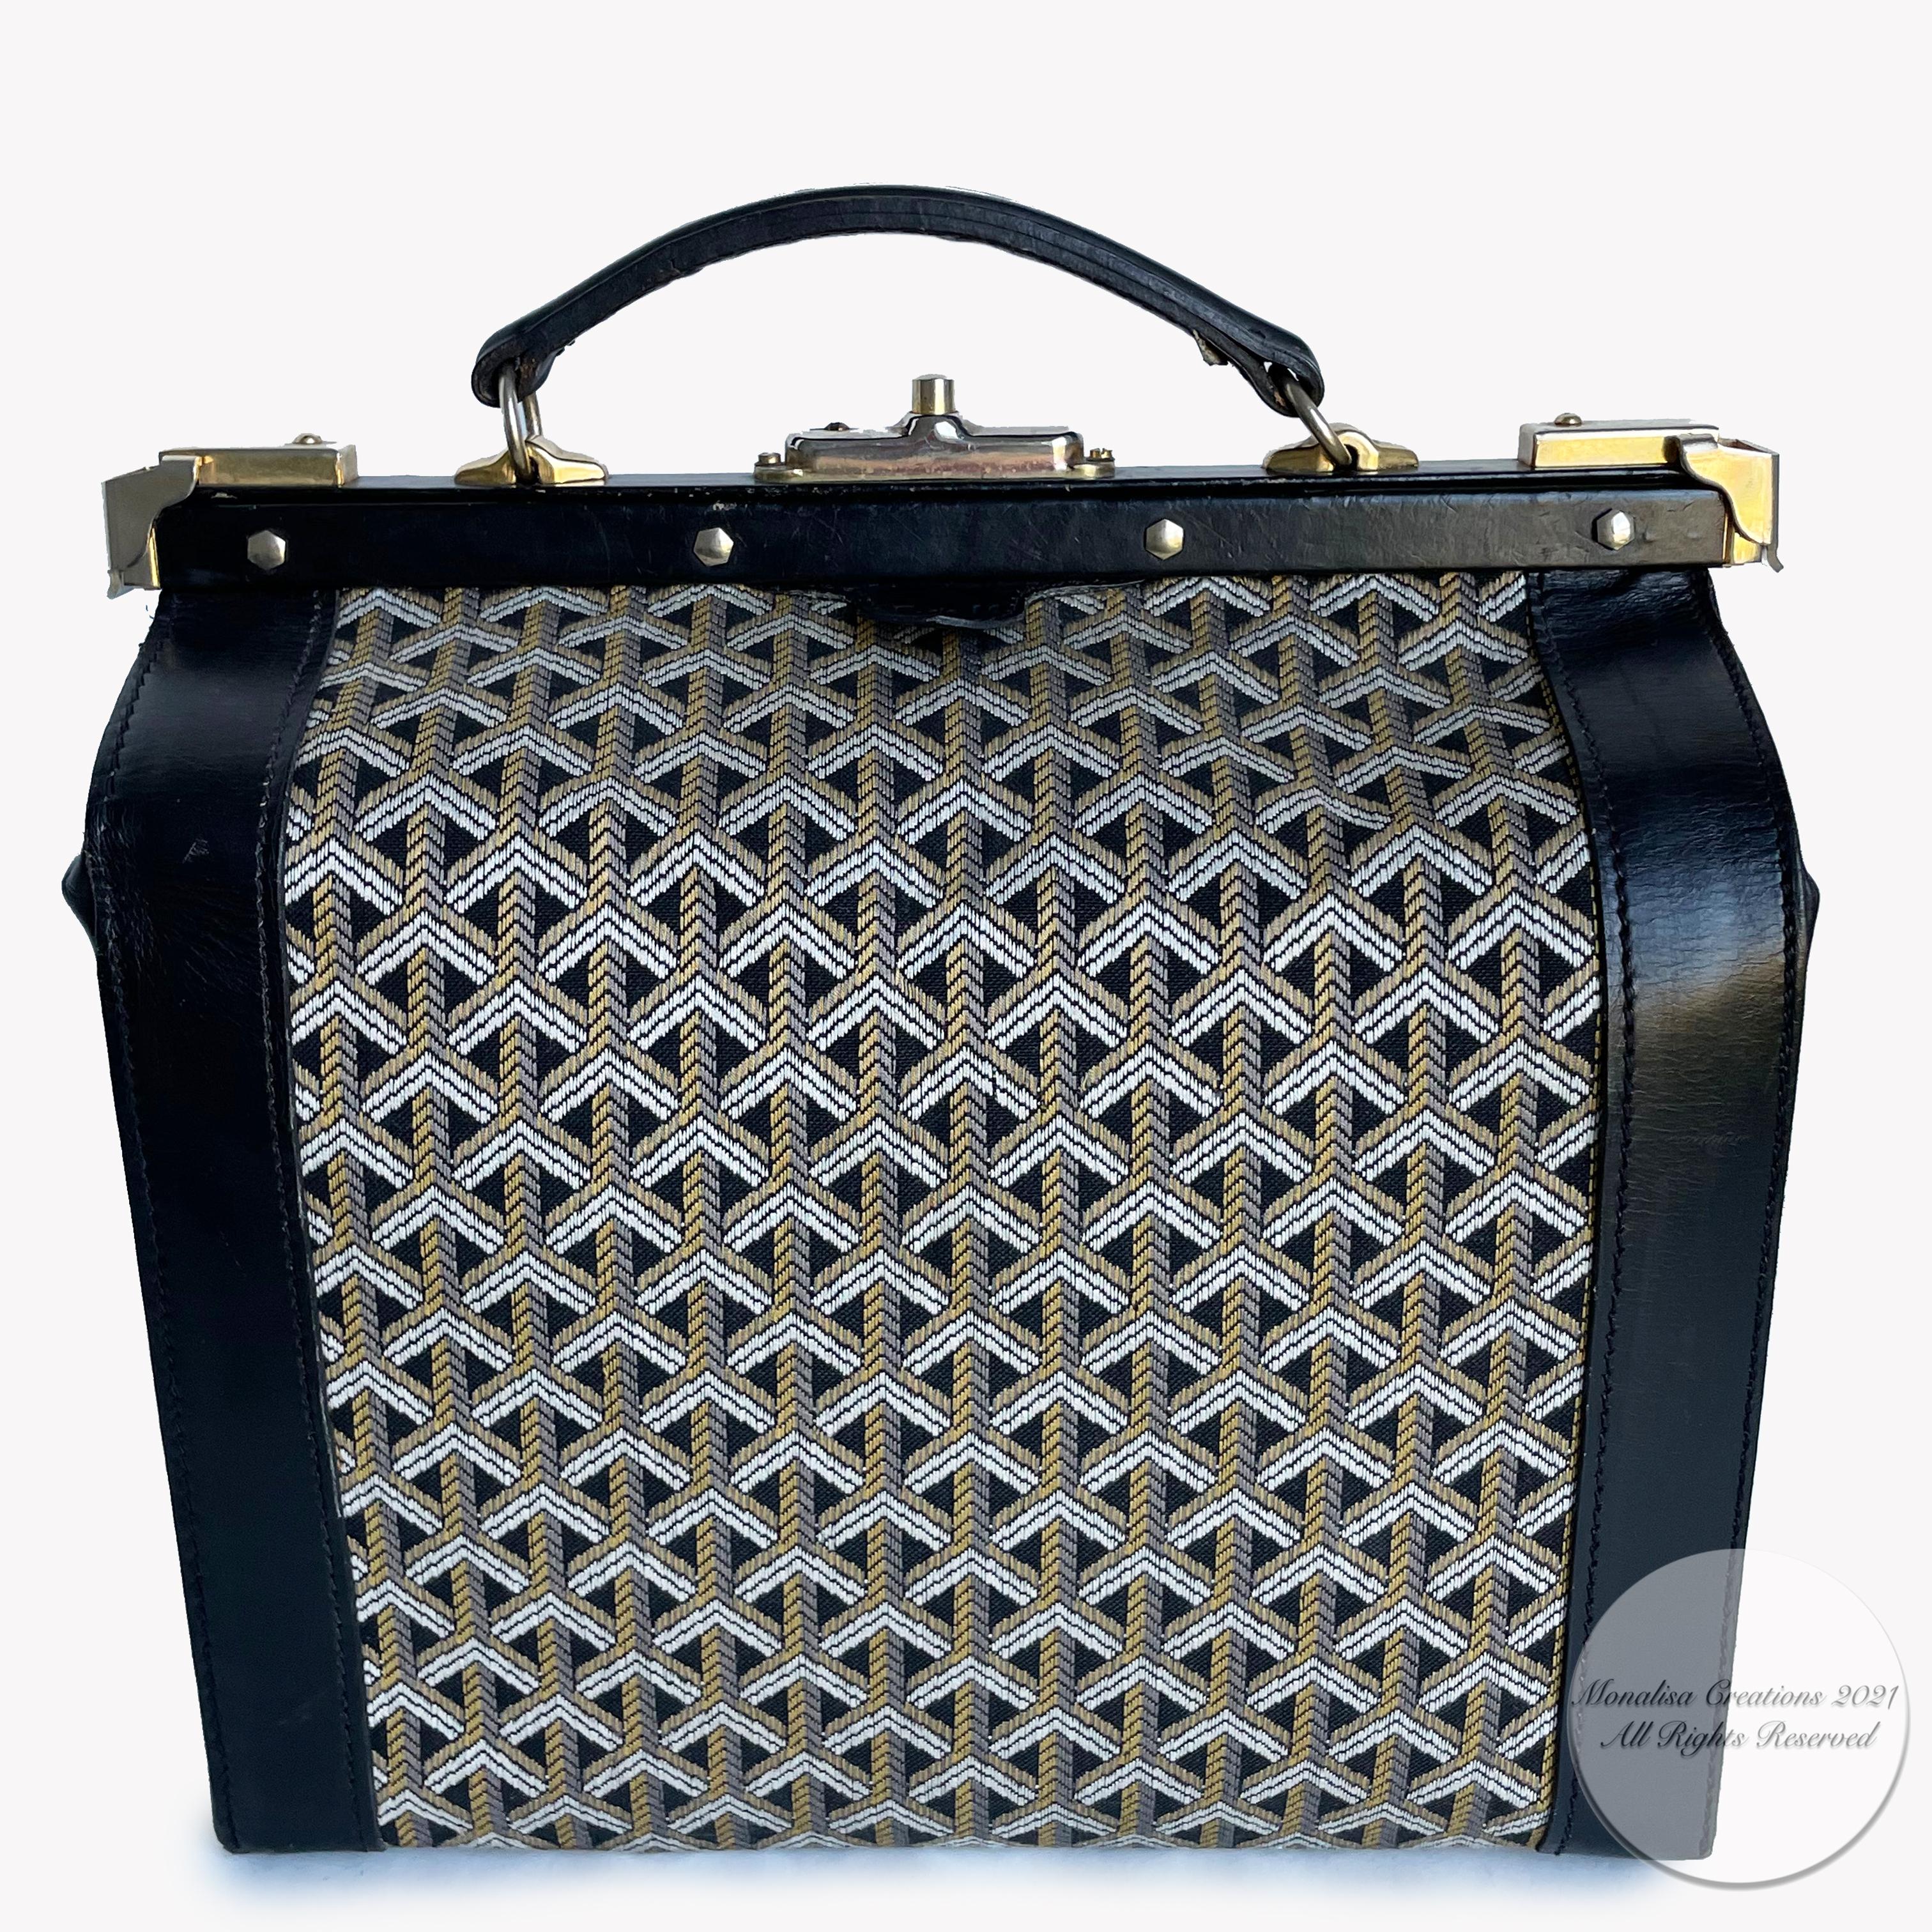 Authentic, preowned, vintage GOYARD train case, from the late 50s. Very cool Gladstone Doctors style bag!
Black leather trim/woven Goyardine fabric exterior & yellow silk interior. 
Push button lock fastener (no keys) w/side latches, allow one to